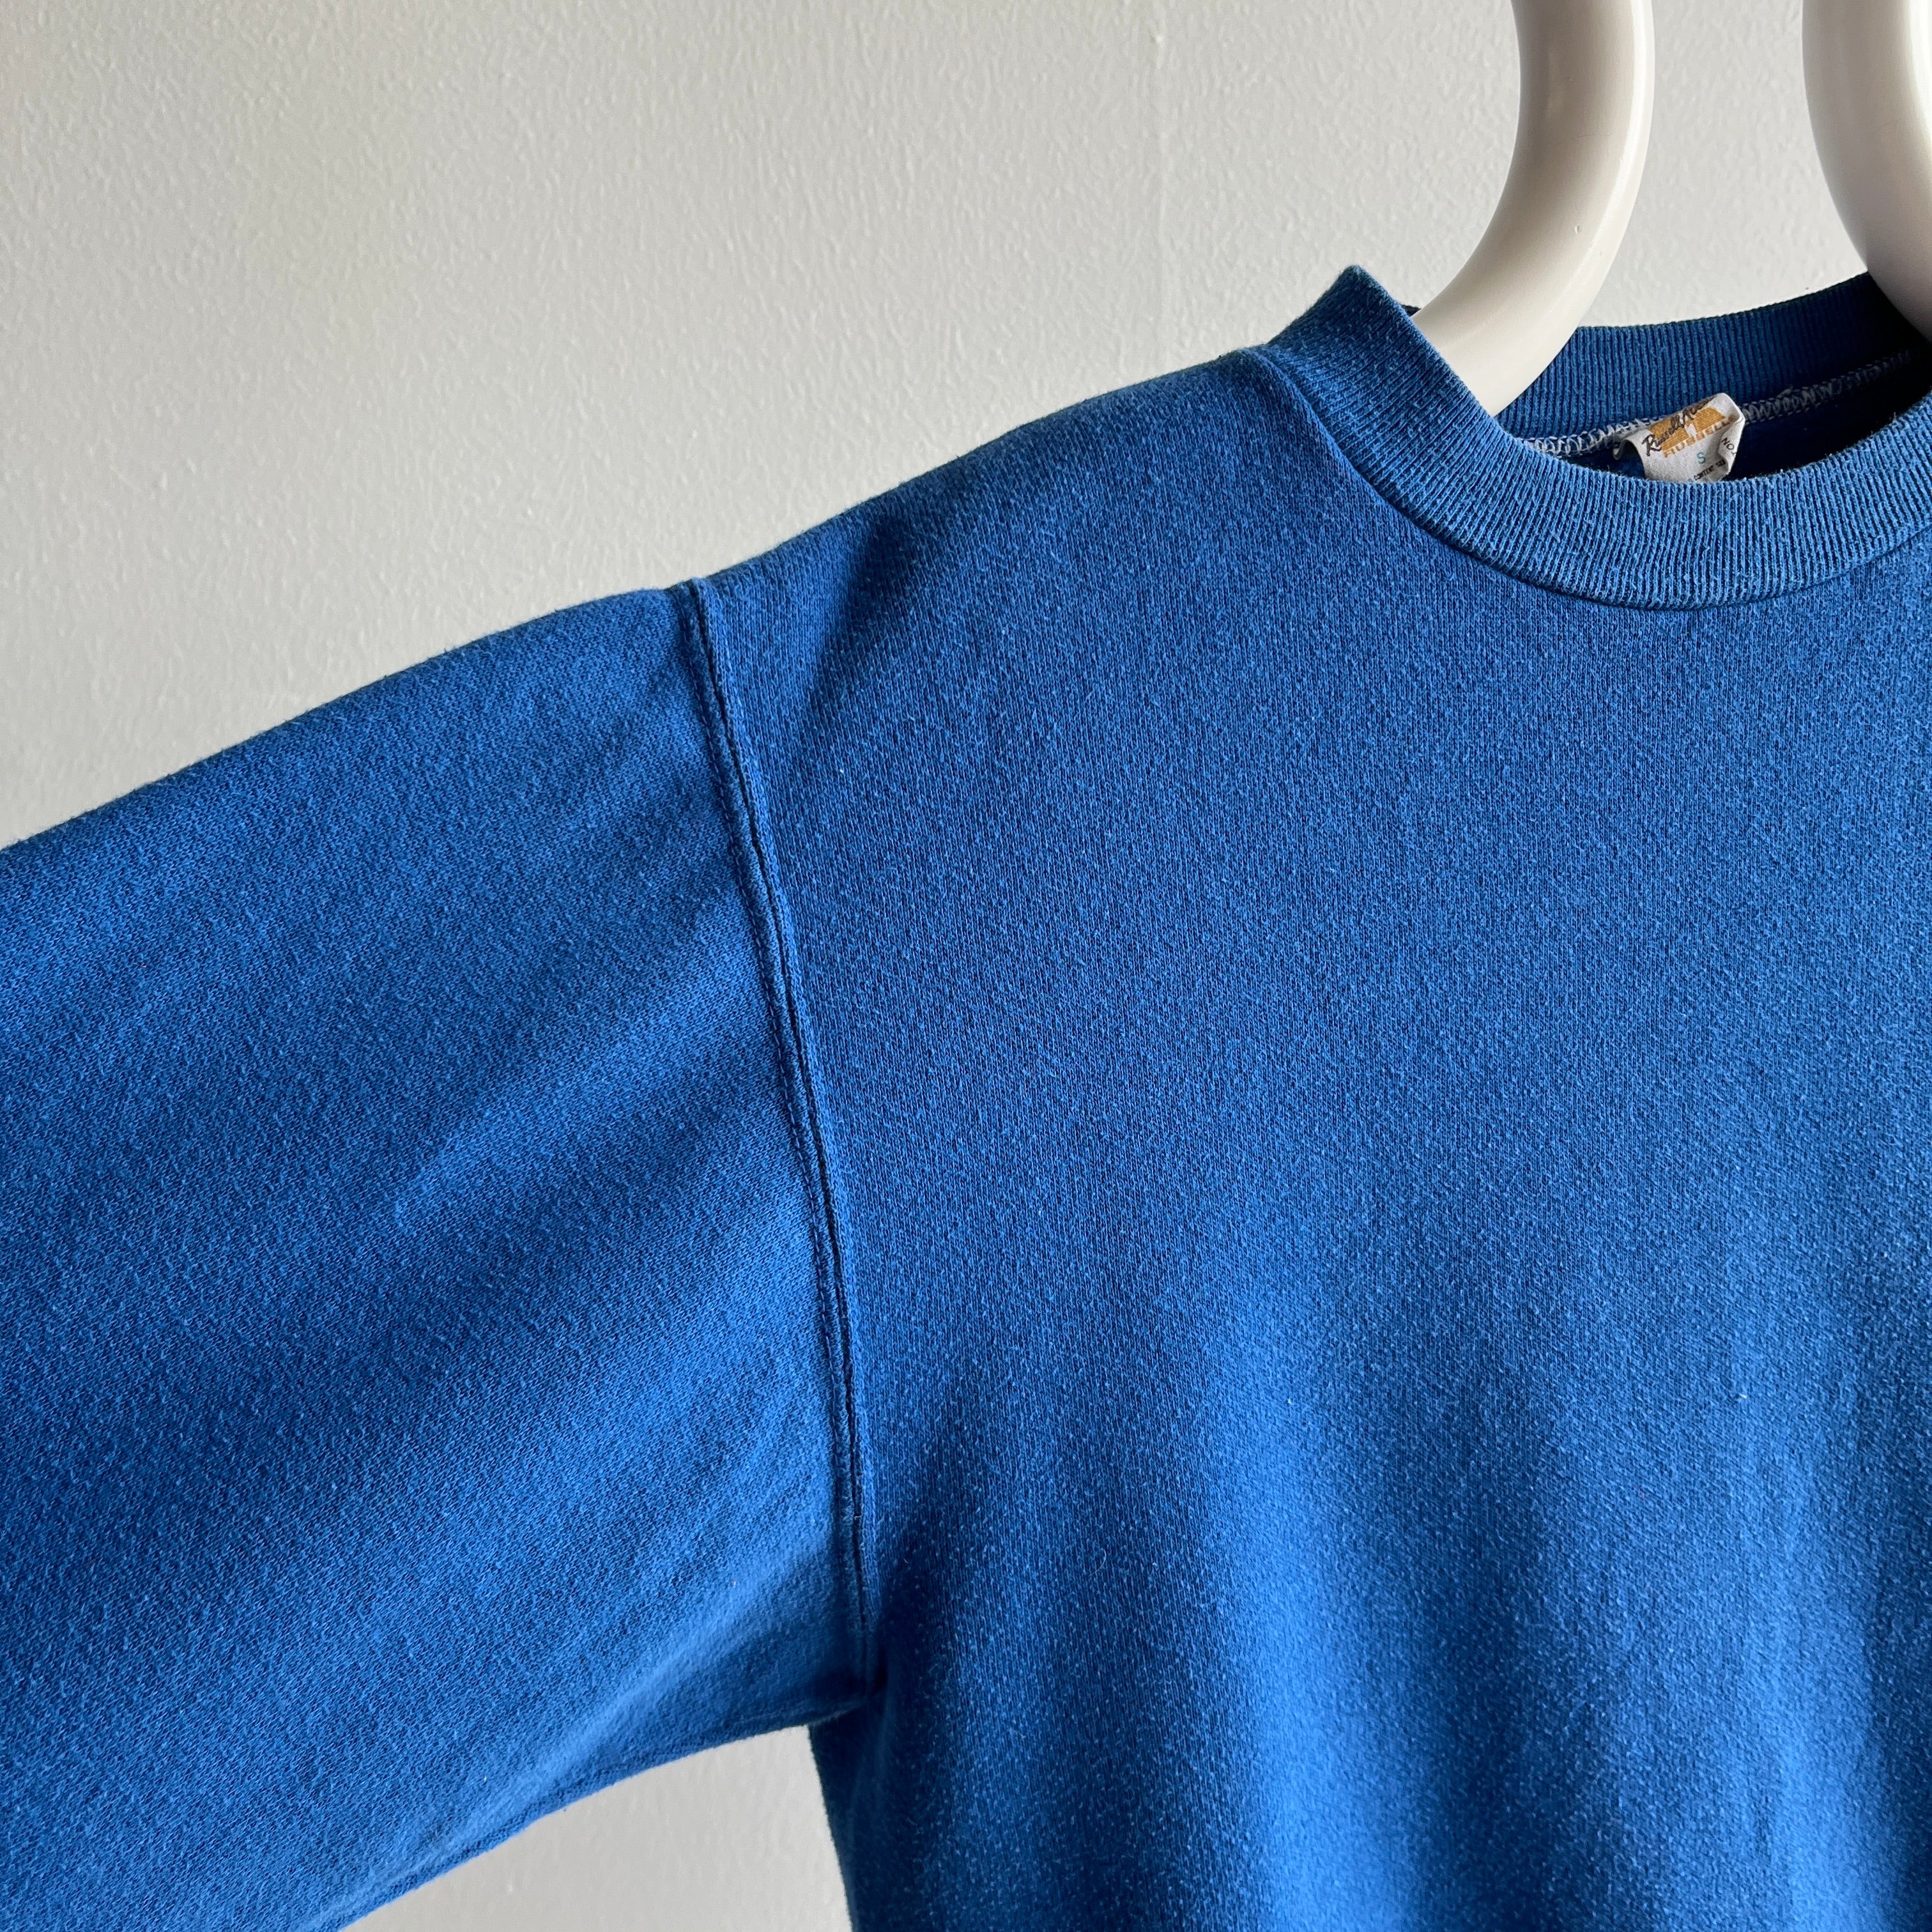 1970/80s Dodger Blue Sweatshirt by Russell Brand (Gold Tag)